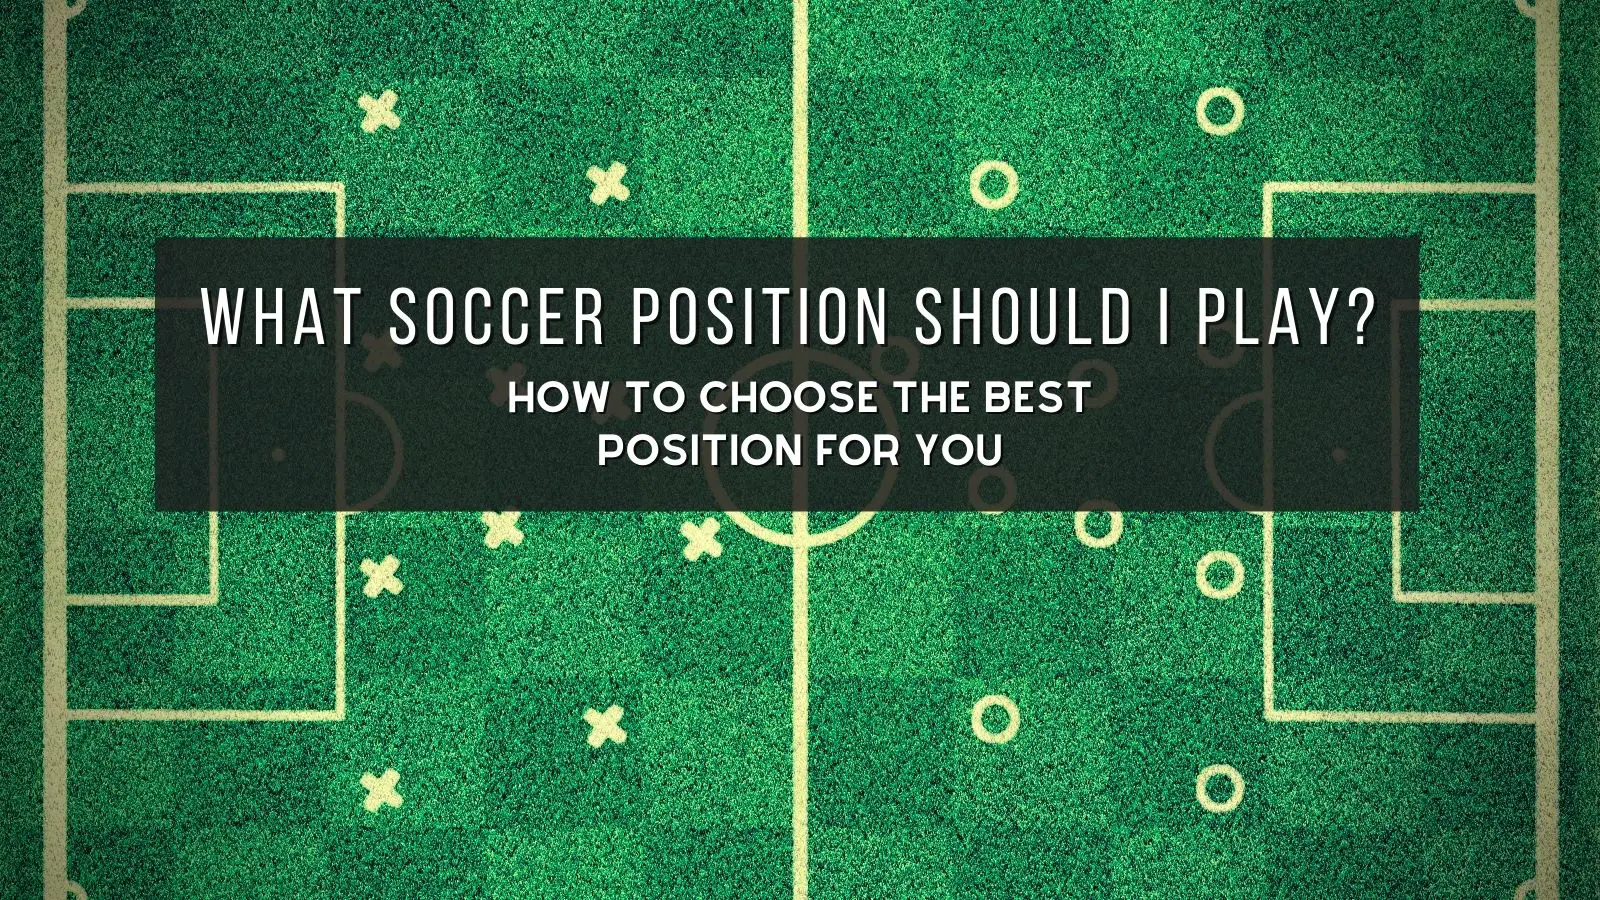 What Soccer Position Should I Play? How to Choose the Best Position for You